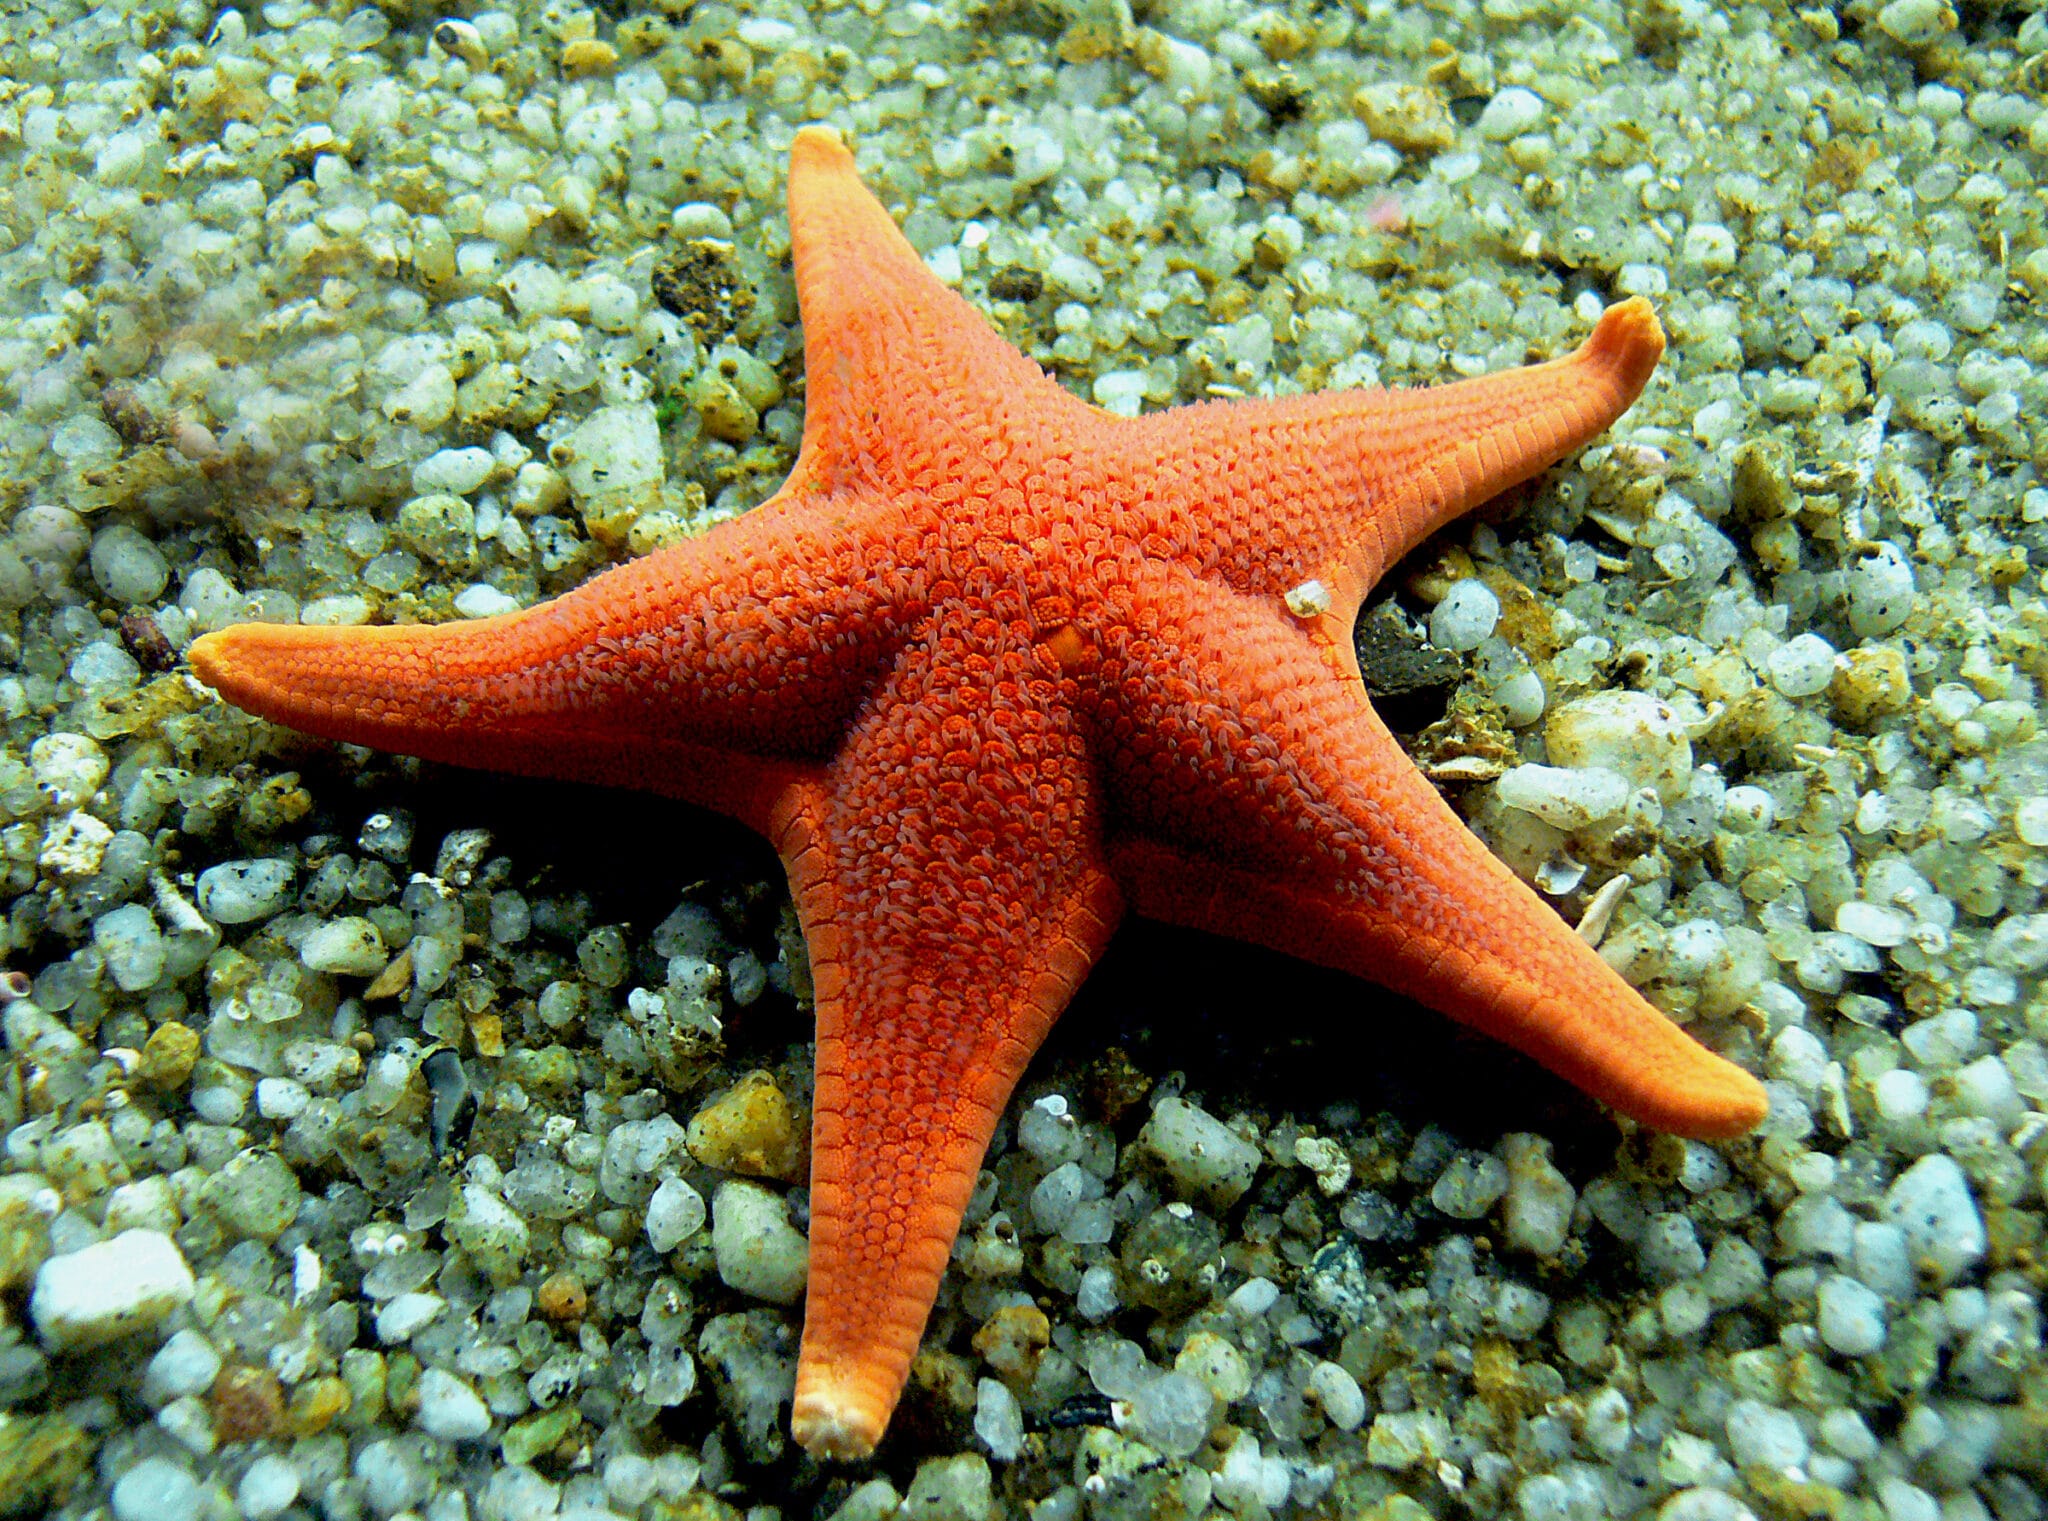  Is A Starfish A Fish